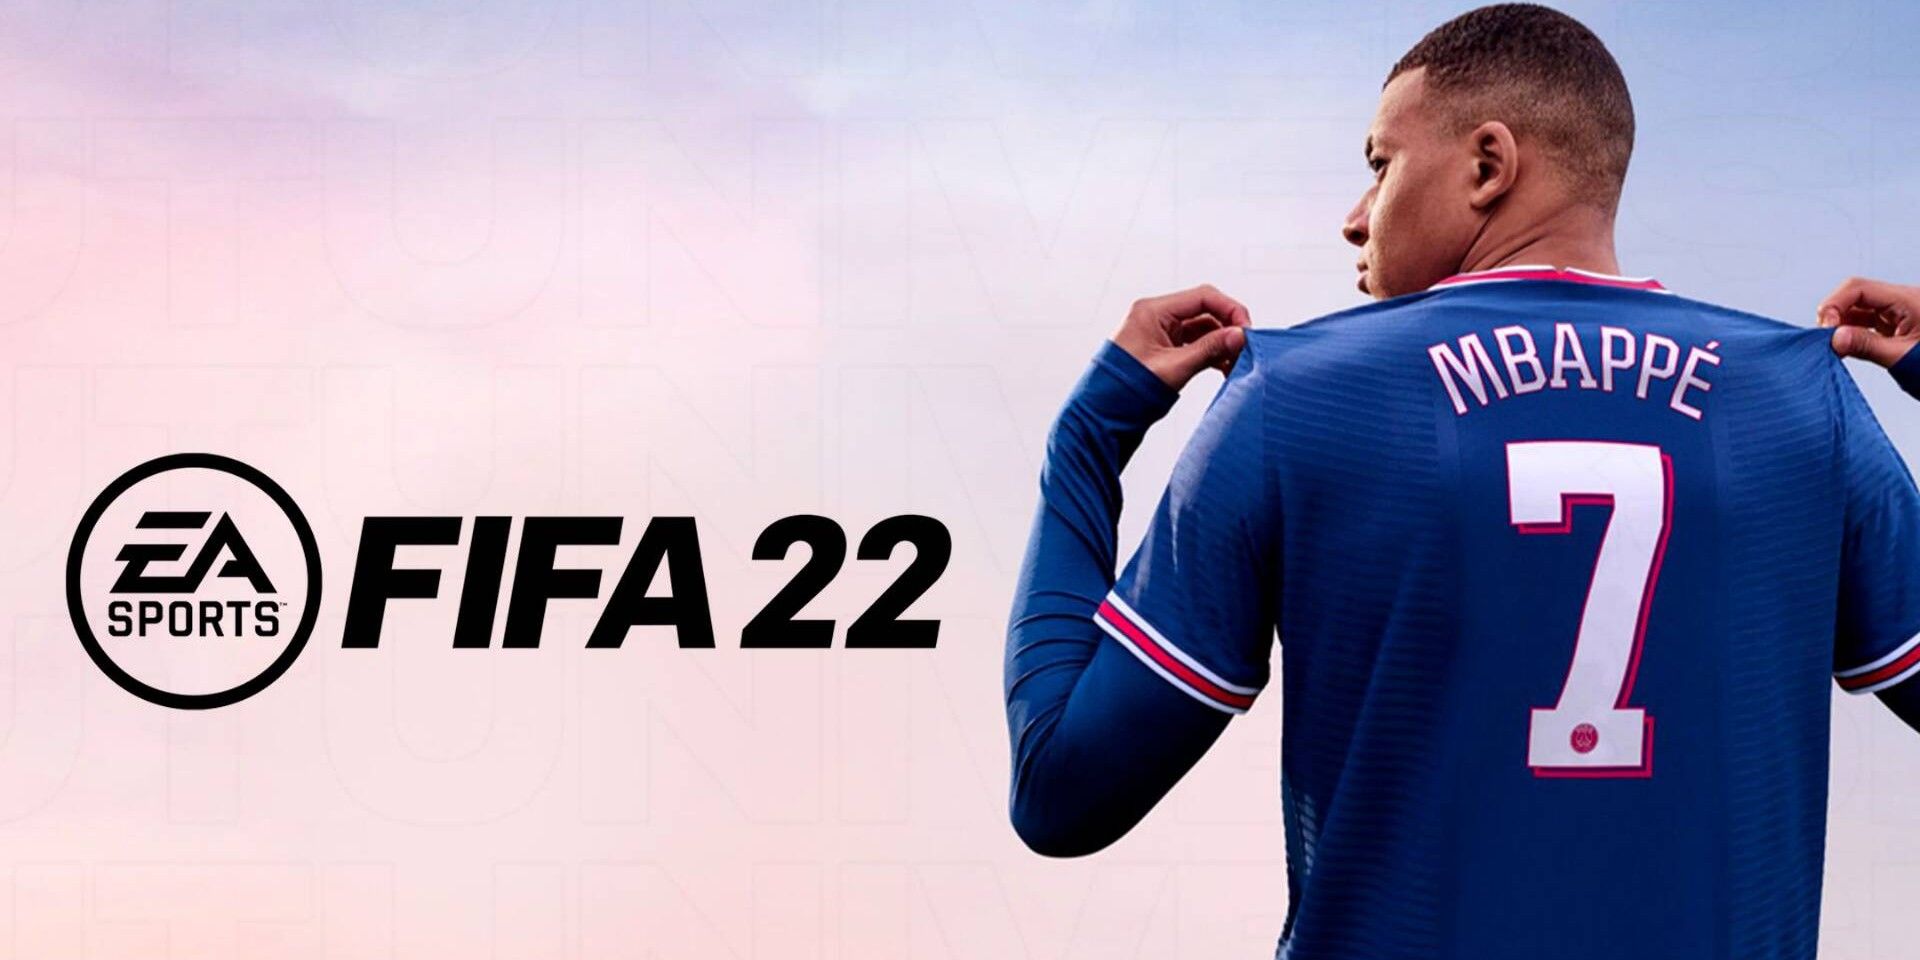 Mbappe putting on a jersey on a banner for FIFA 22.